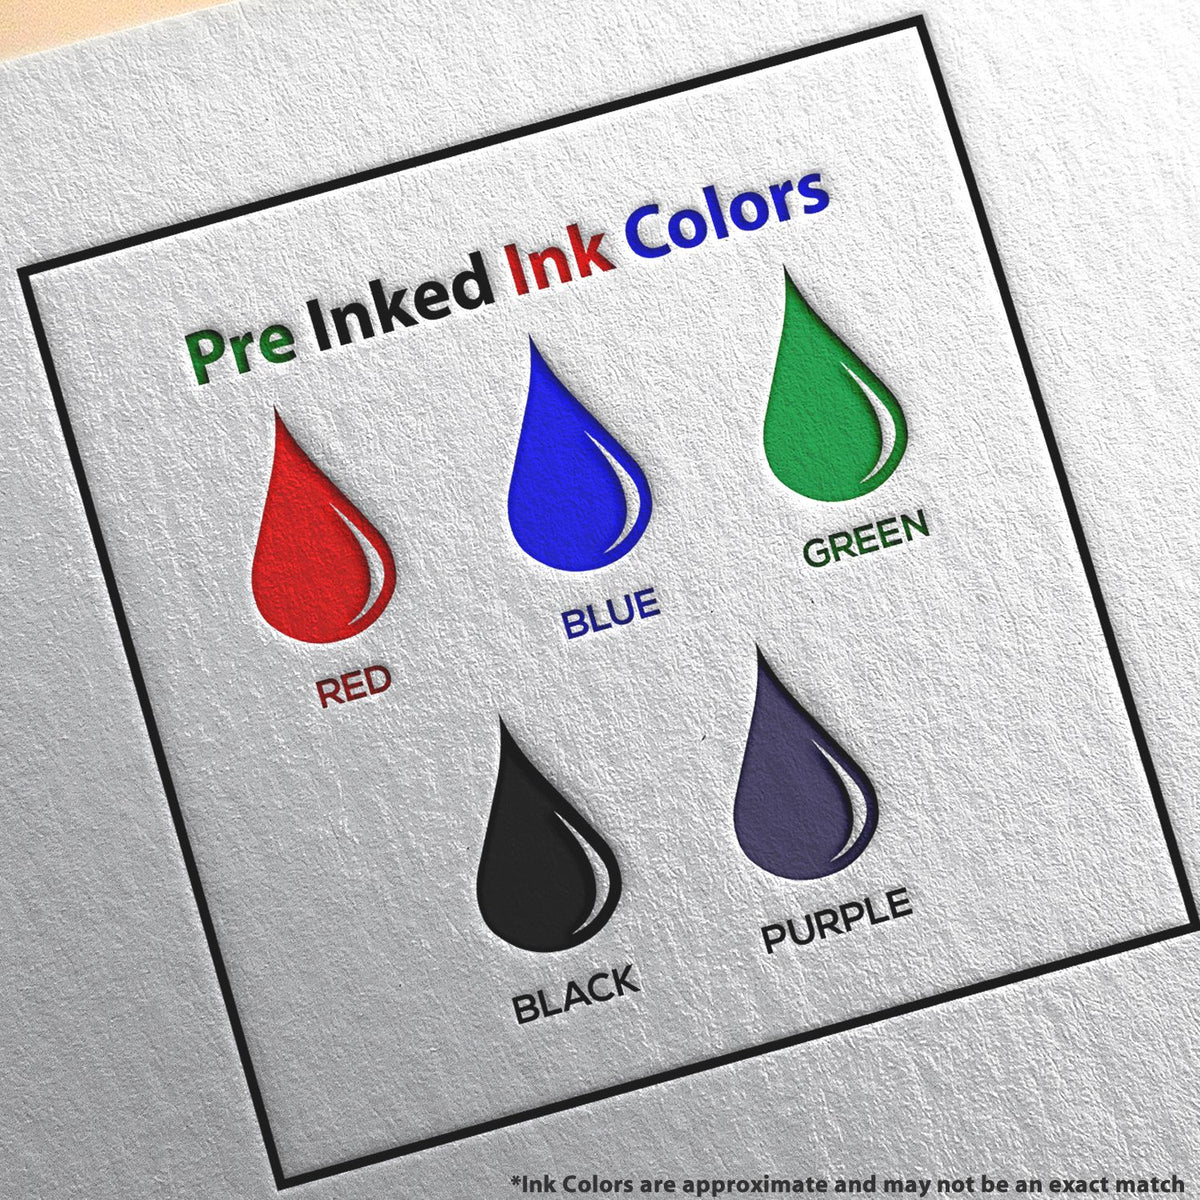 A picture showing the different ink colors or hues available for the Slim Pre-Inked North Carolina Landscape Architect Seal Stamp product.